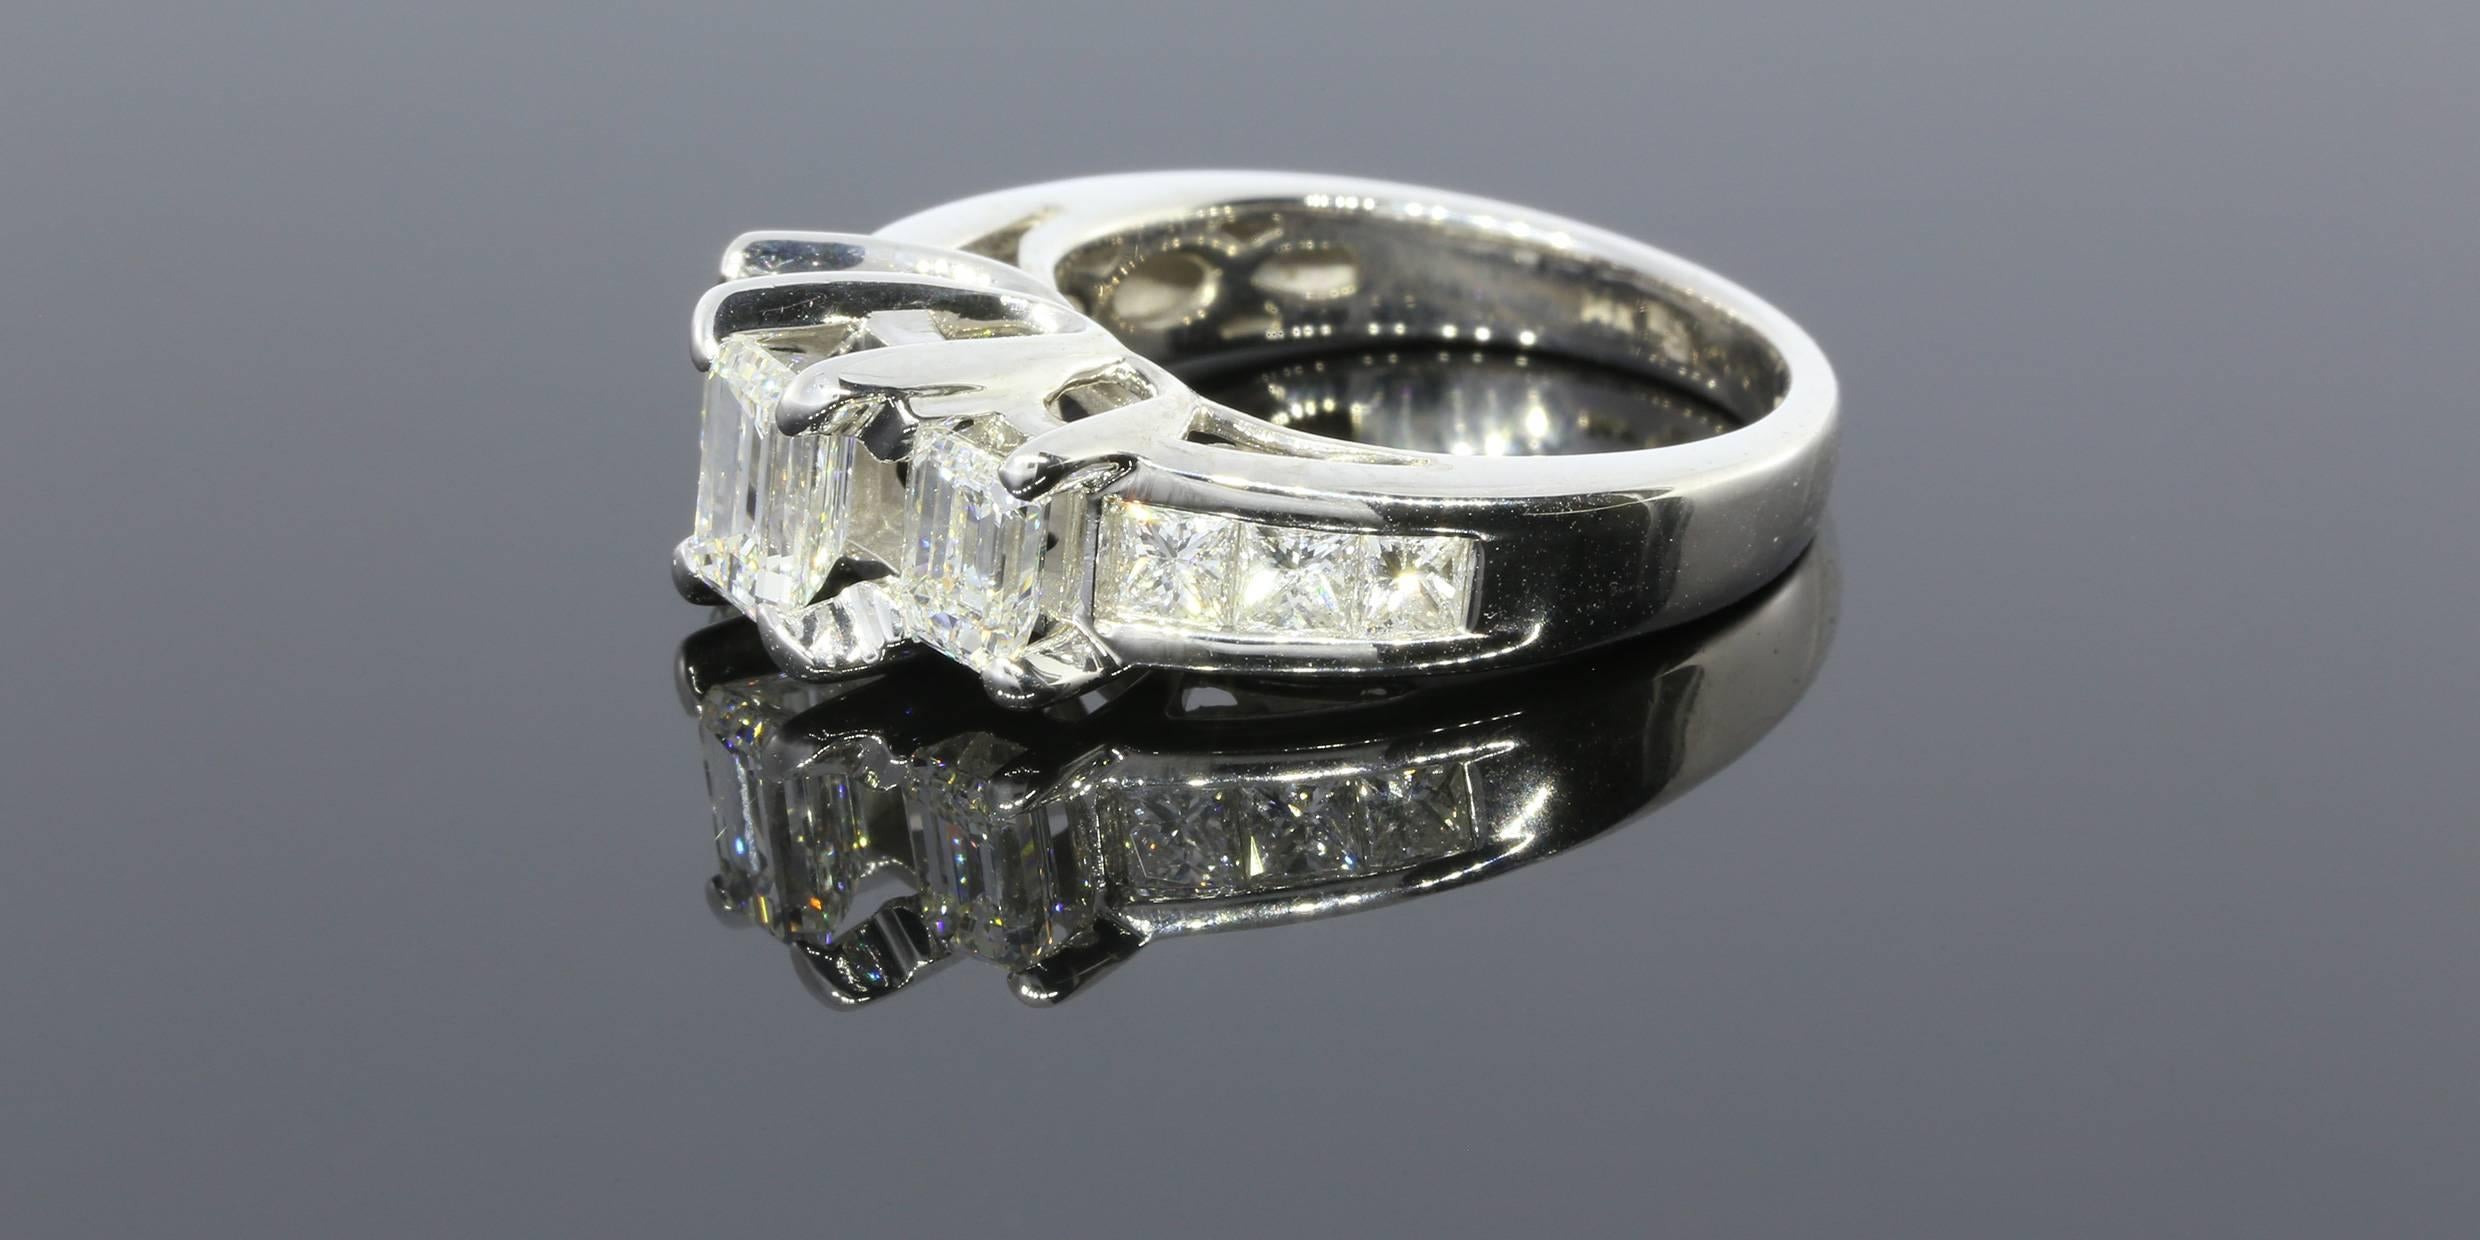 This ring features 3 emerald cut diamonds prong set in a 3-stone style mounting and three princess cut diamonds channel set on either side.  The center stone is a 0.60ct emerald cut diamond with 0.40ct emerald cut stones on either side. The channel